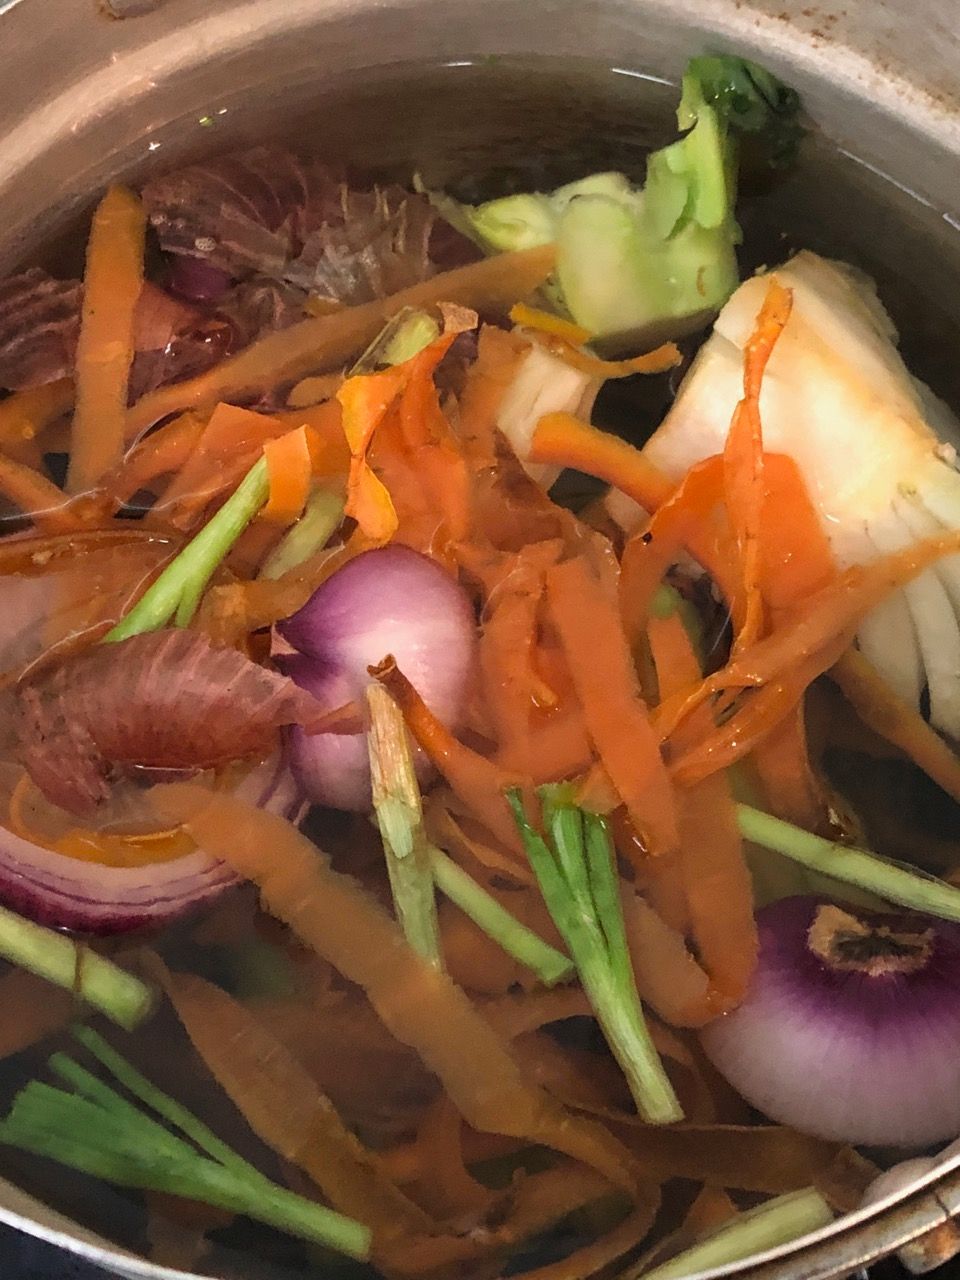 First Time Making Vegetable Stock